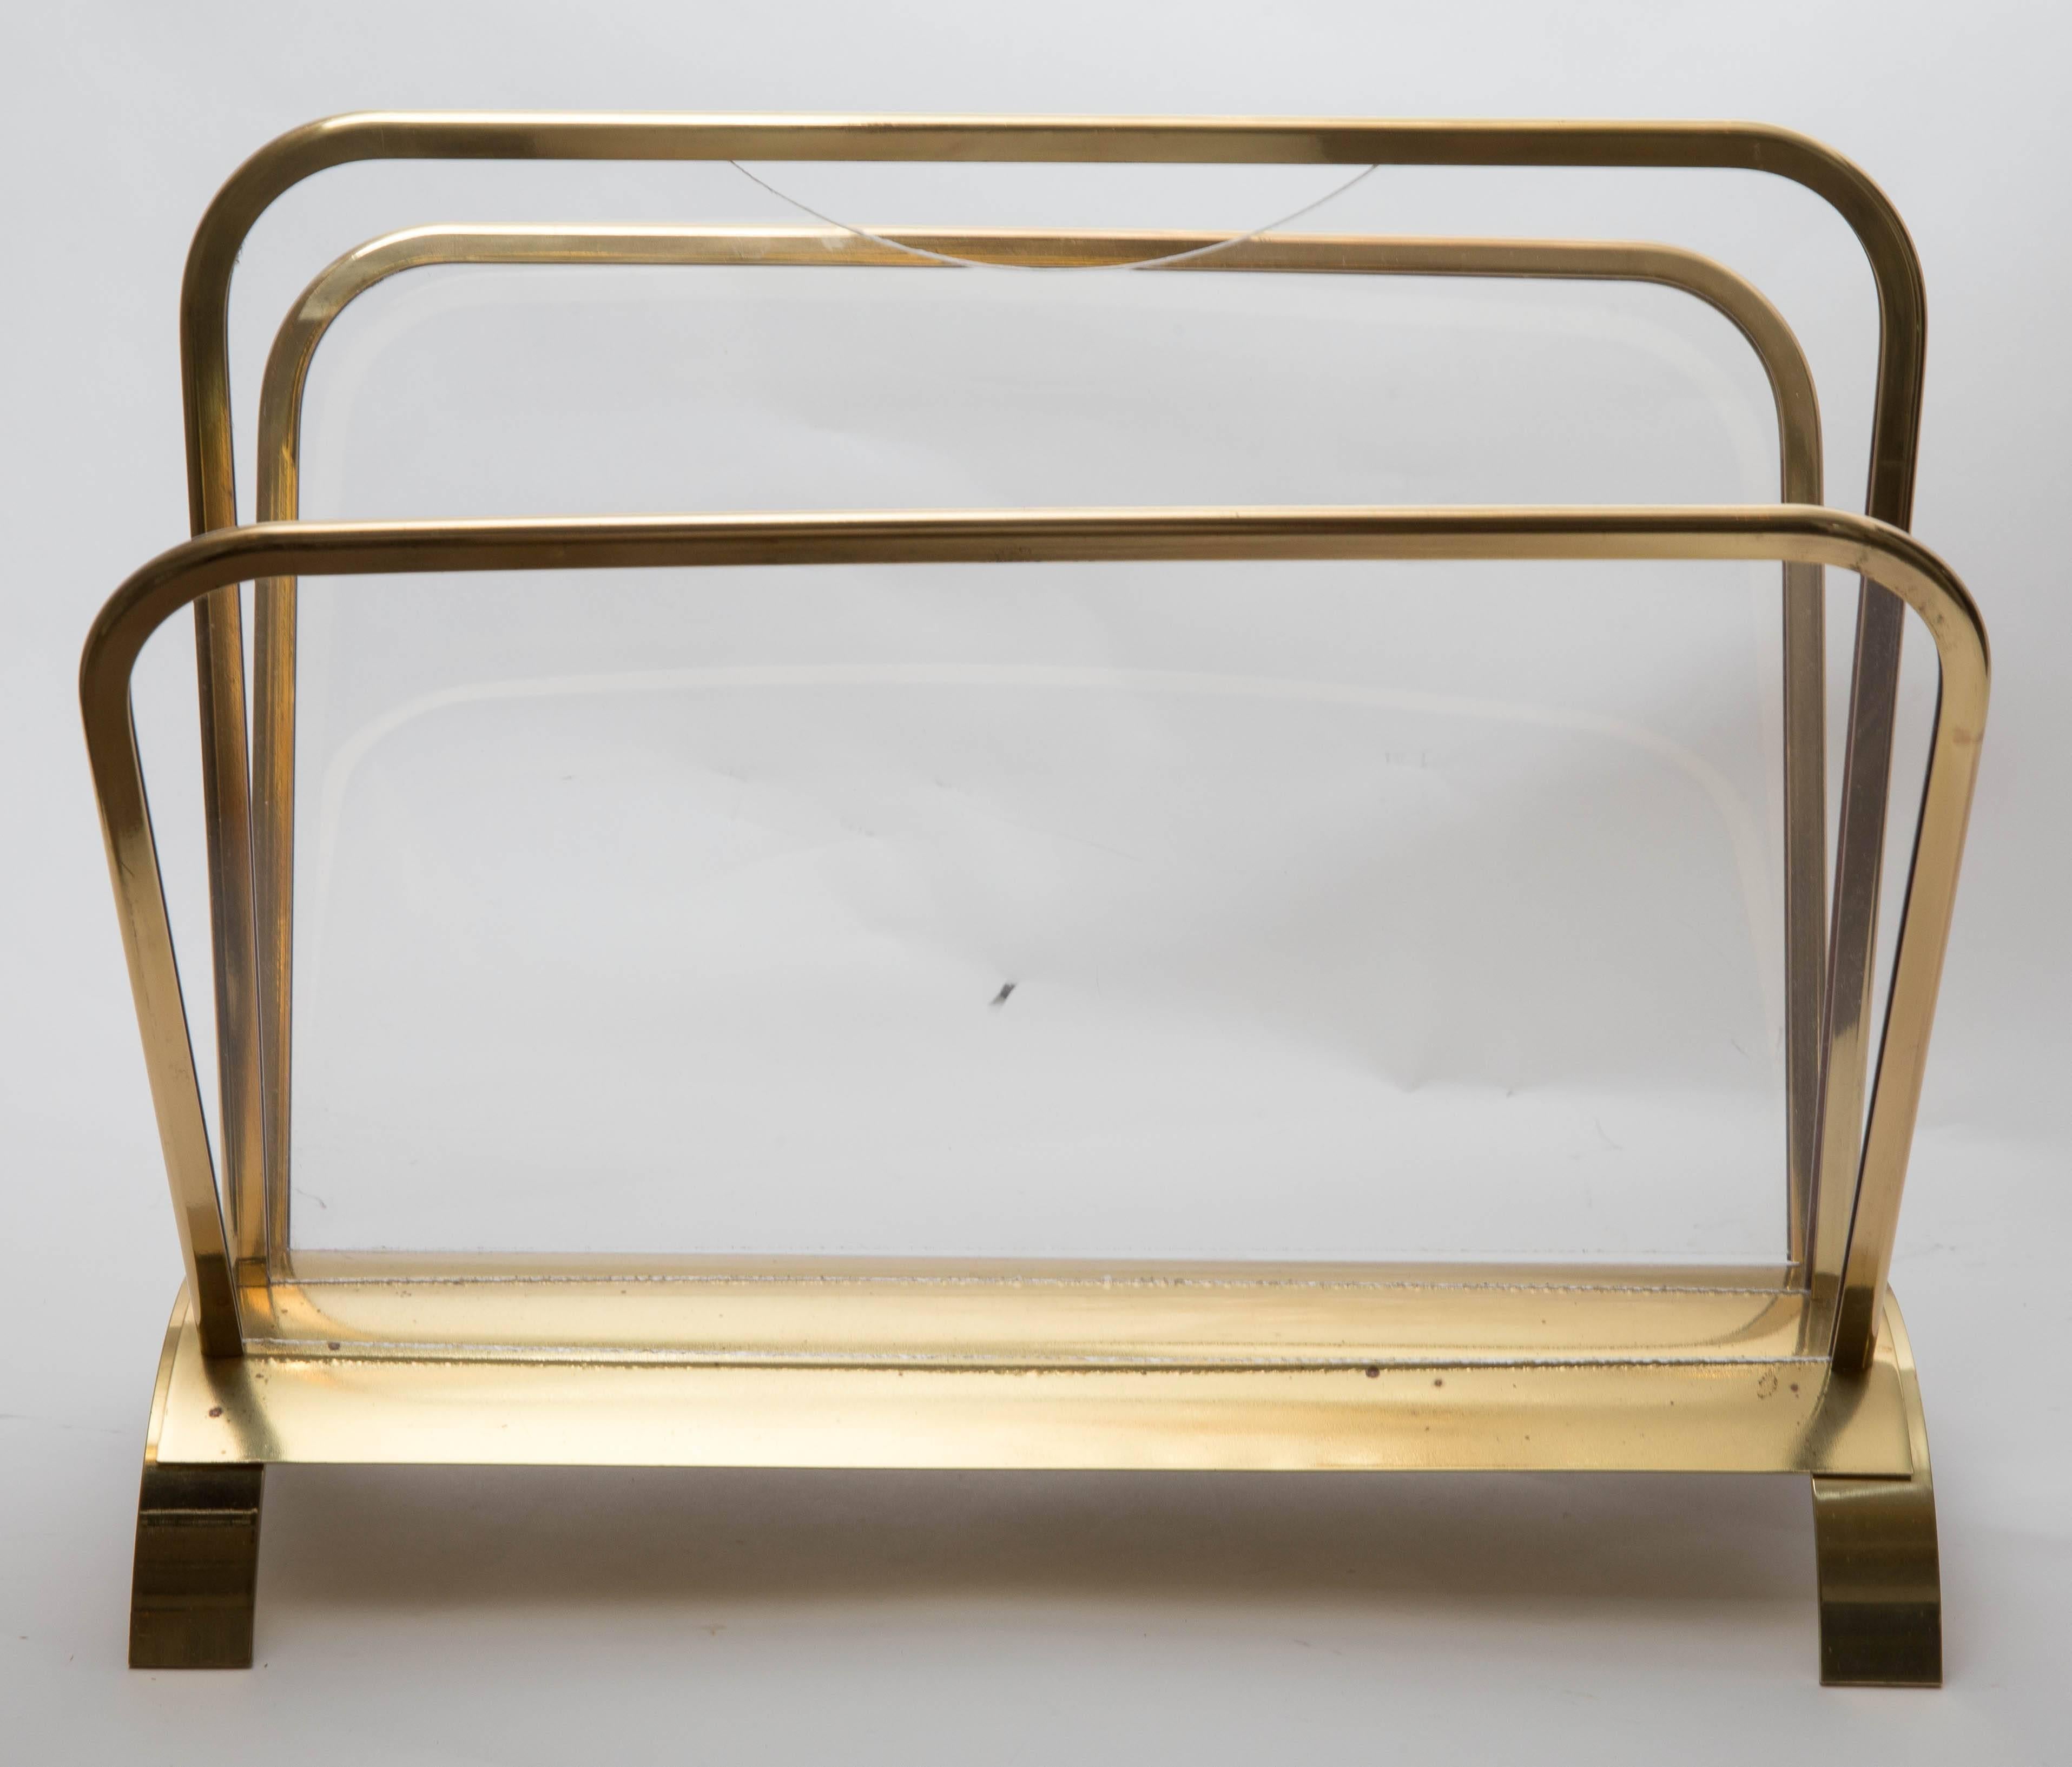 20th Century Brass and Lucite Magazine Holder For Sale